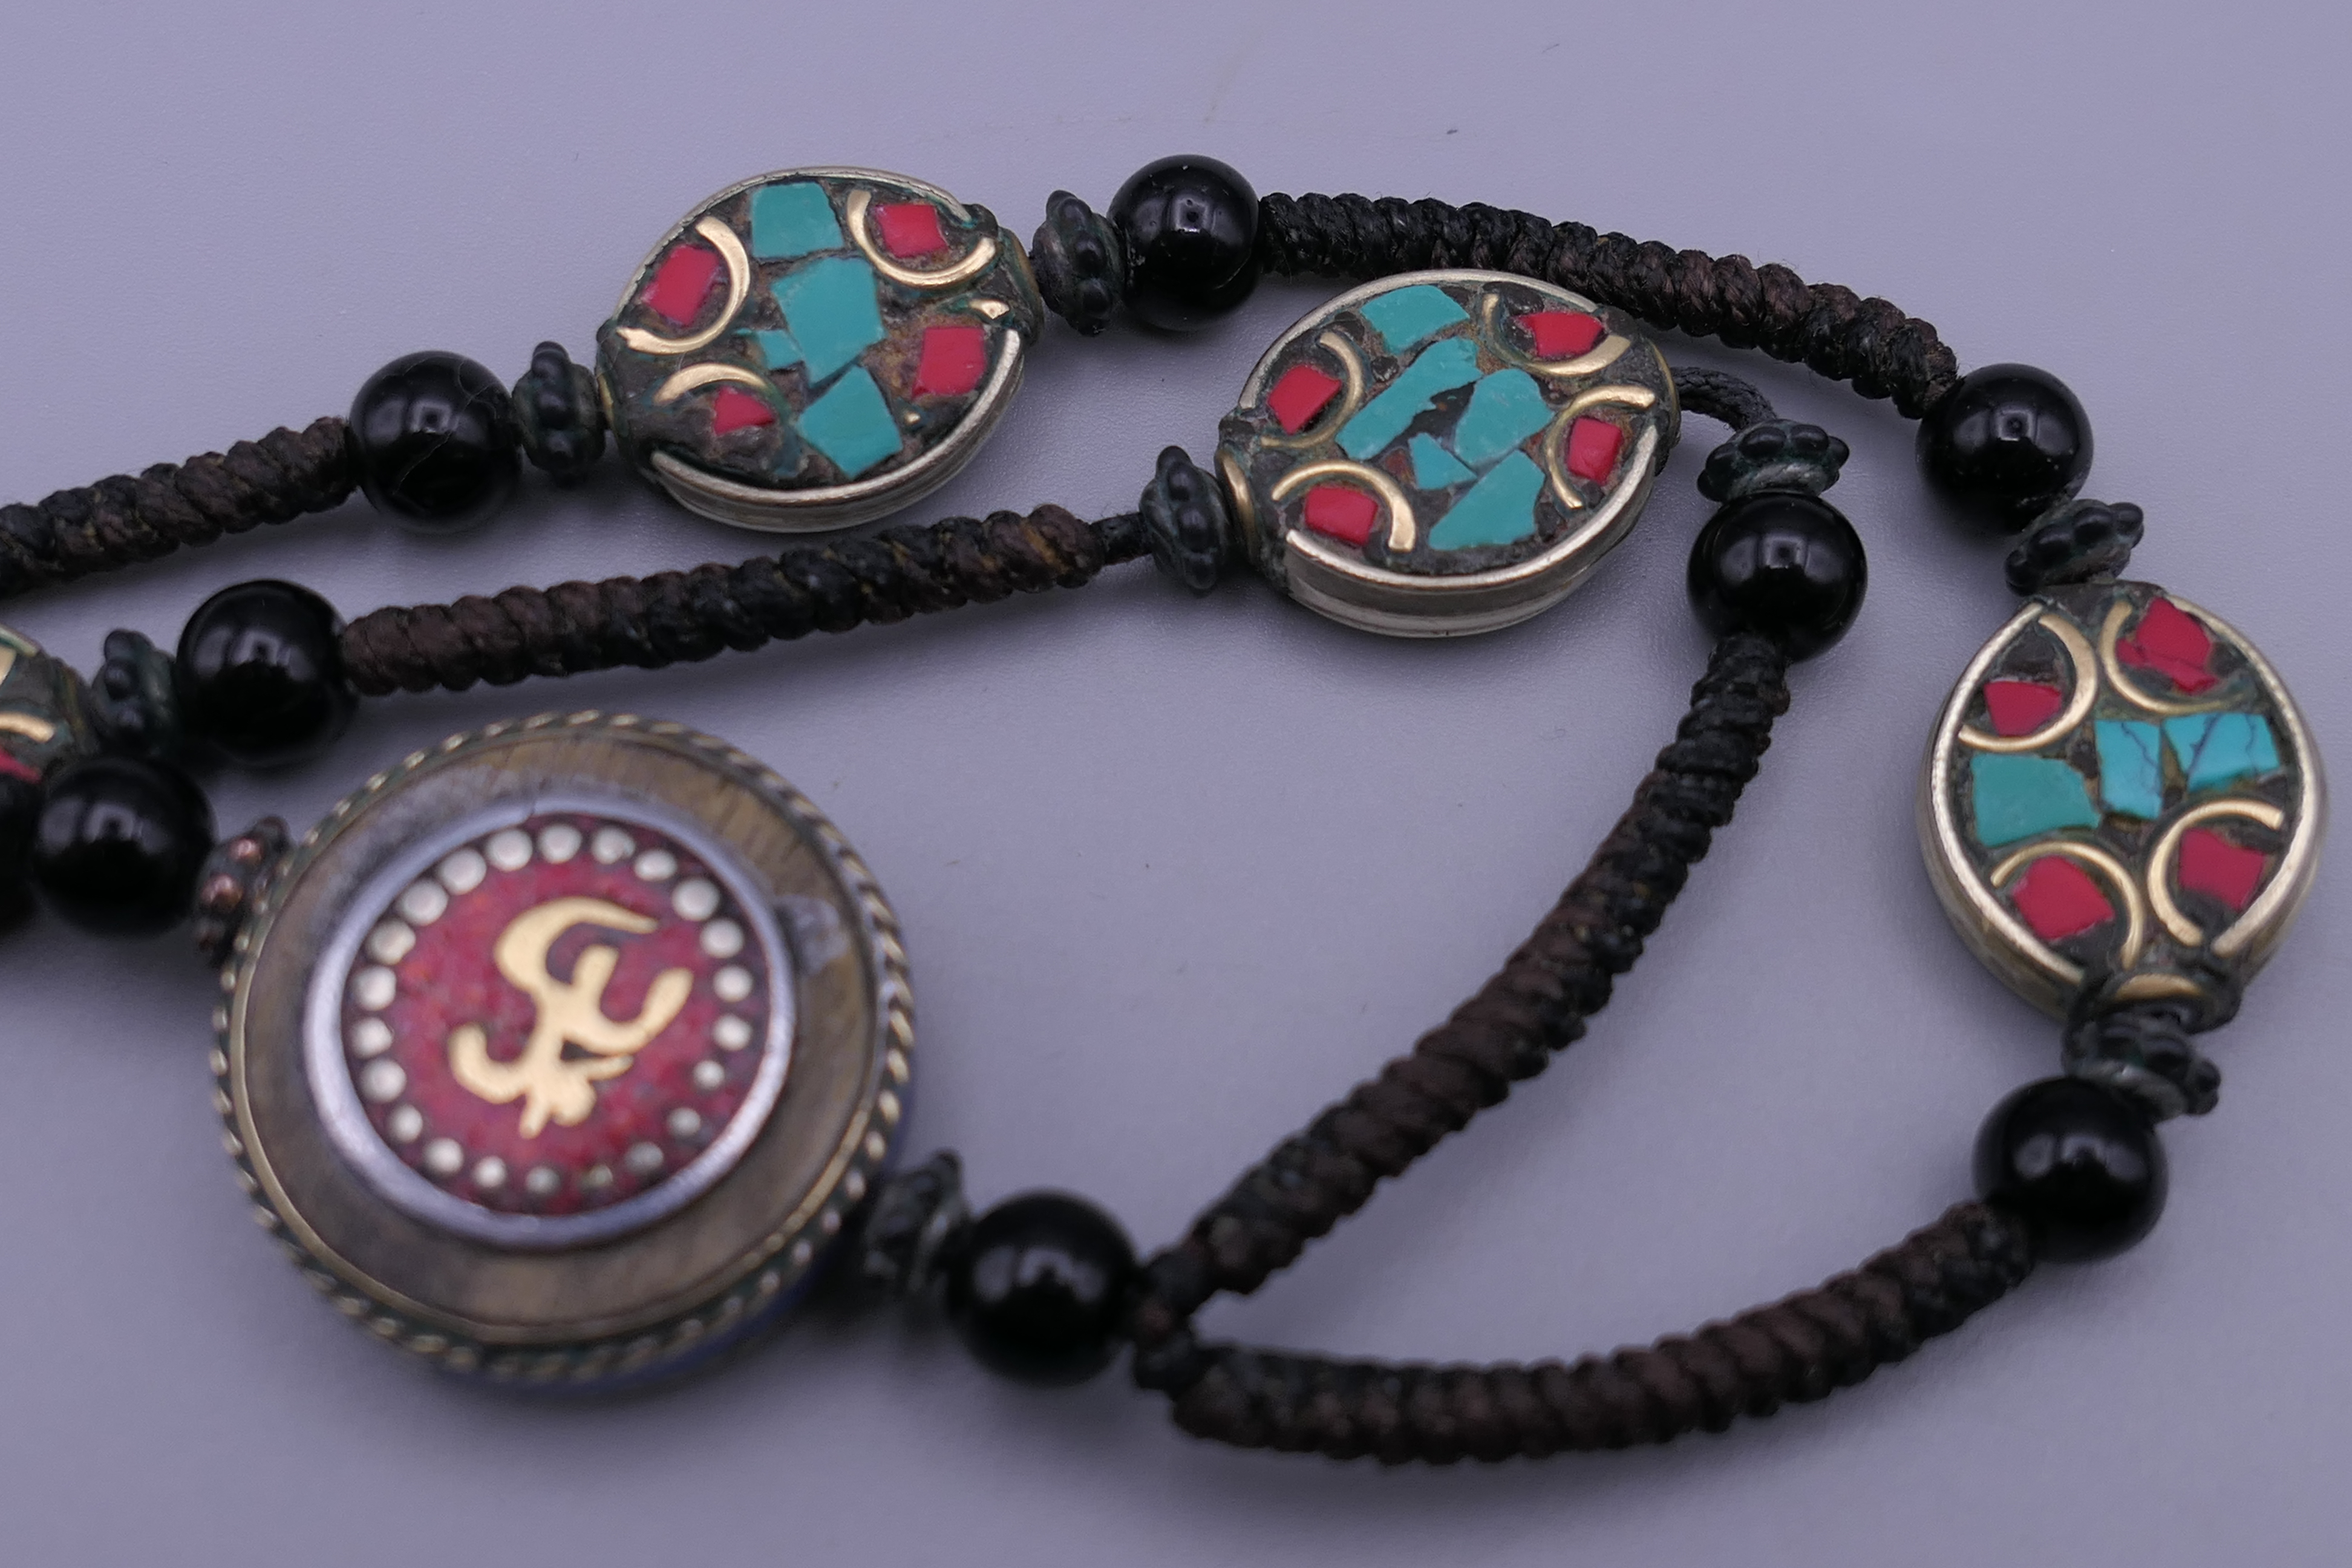 A Tibetan necklace and an African glass bead necklace. - Image 3 of 4